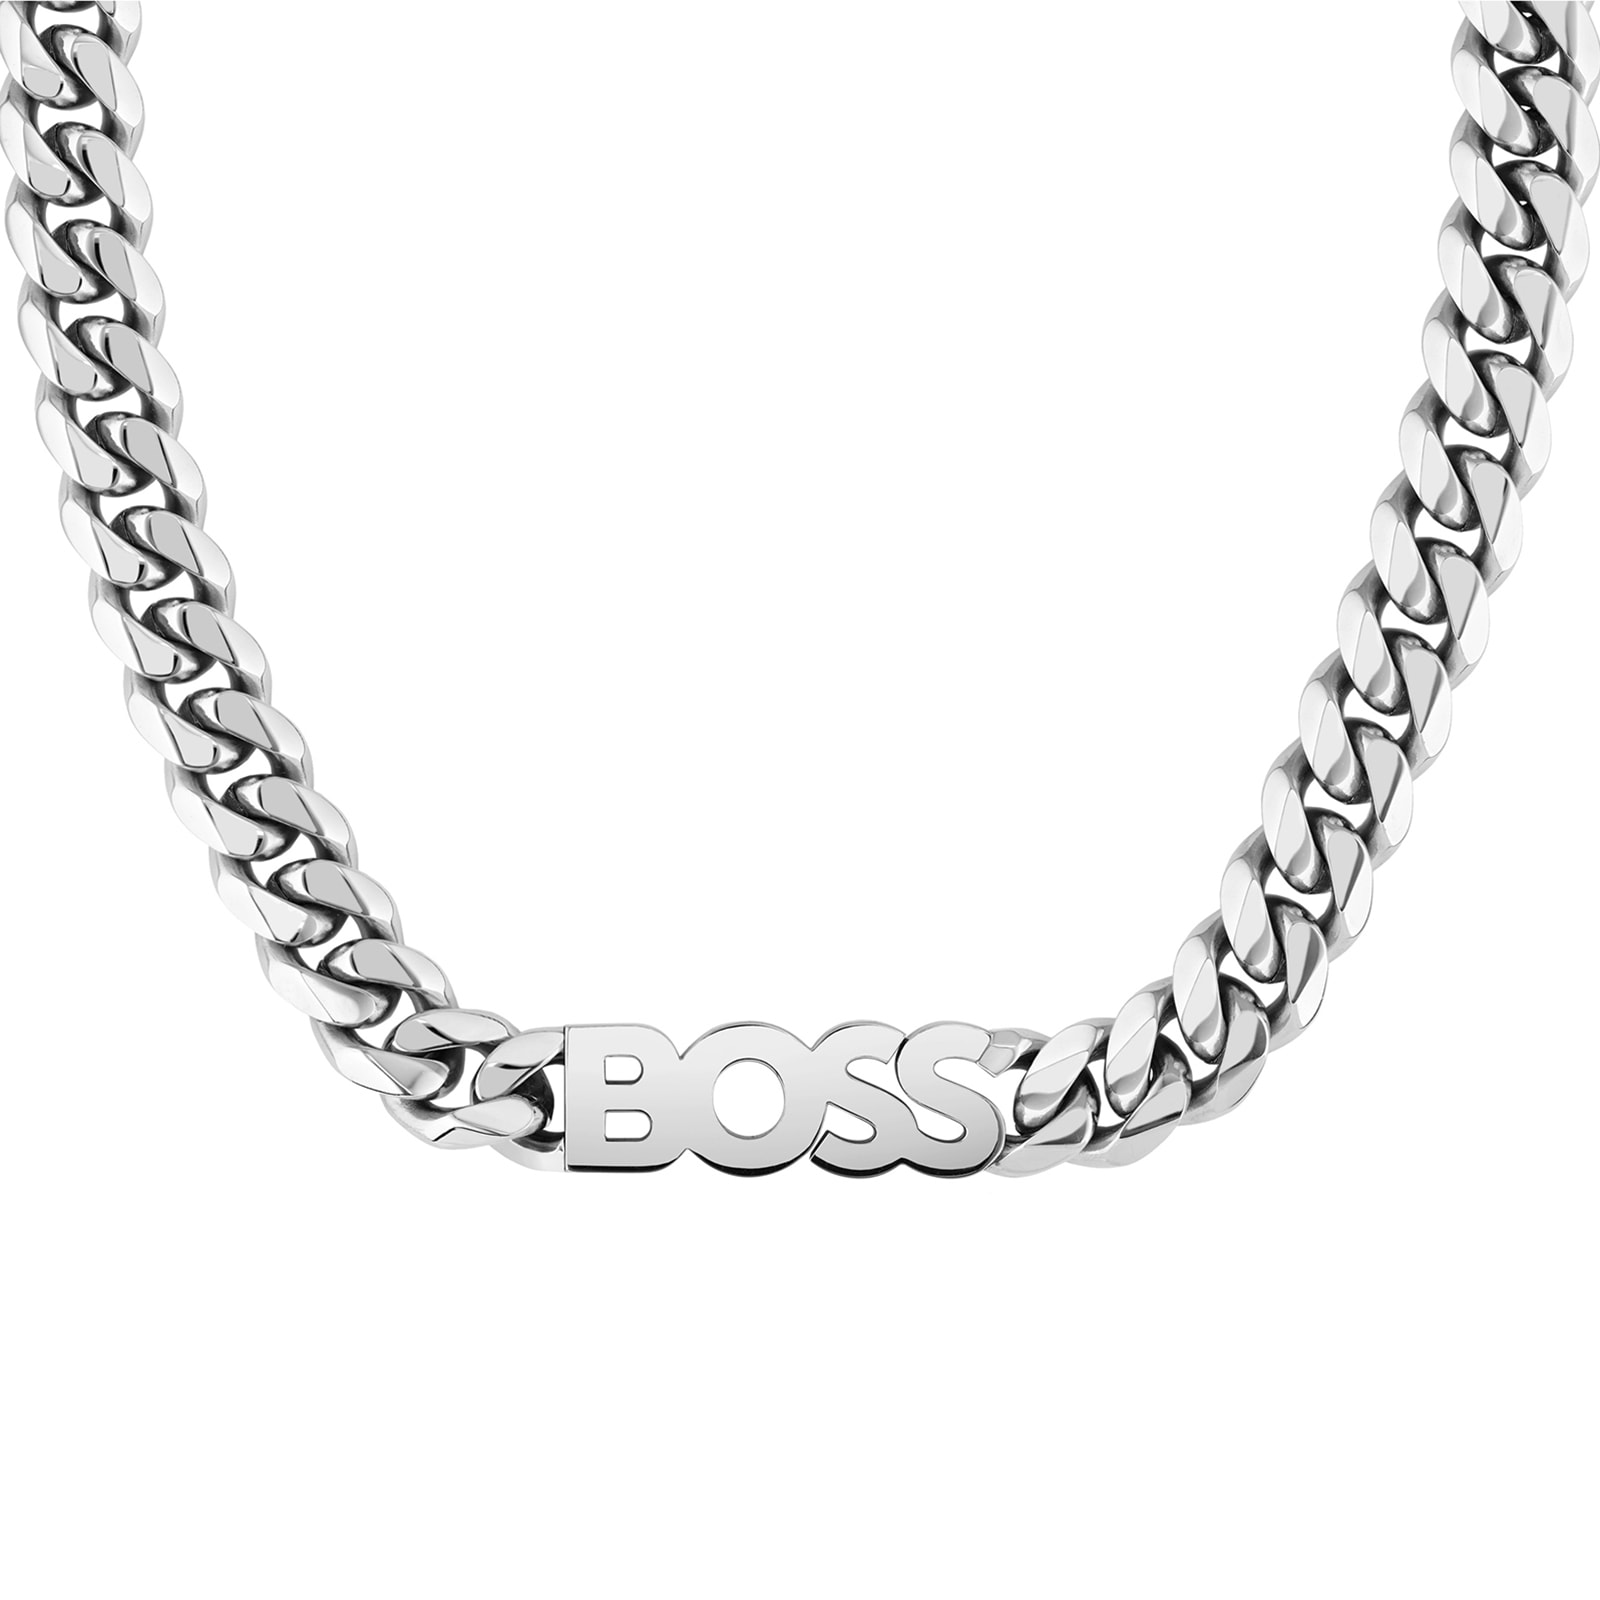 HUGO BOSS neckchain in silver with silicone wrapped dog tag - ShopStyle  Jewelry